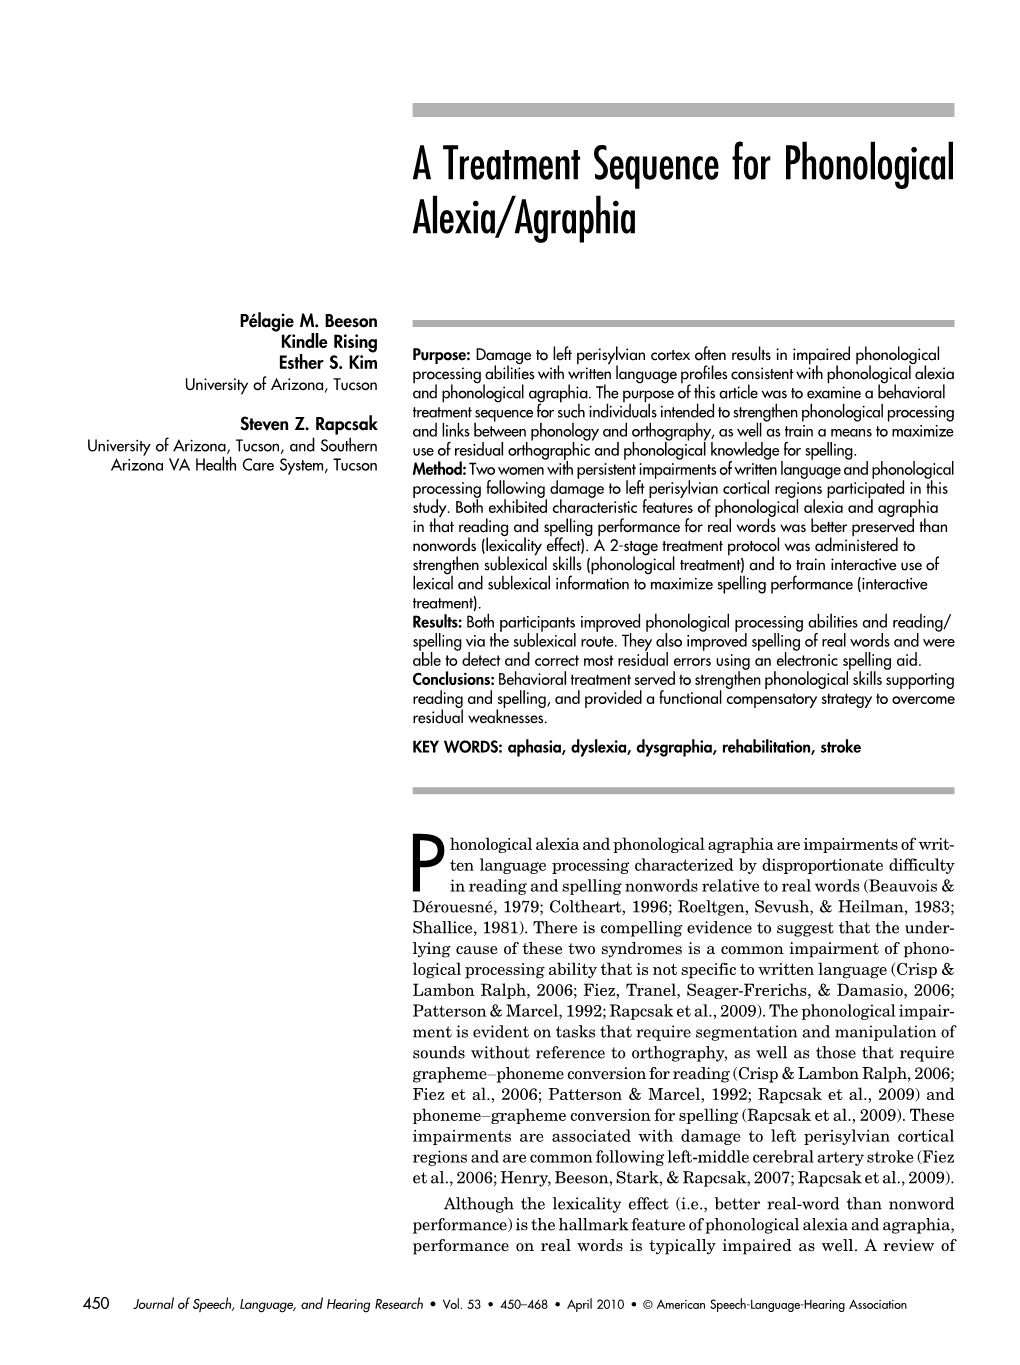 A Treatment Sequence for Phonological Alexia/Agraphia